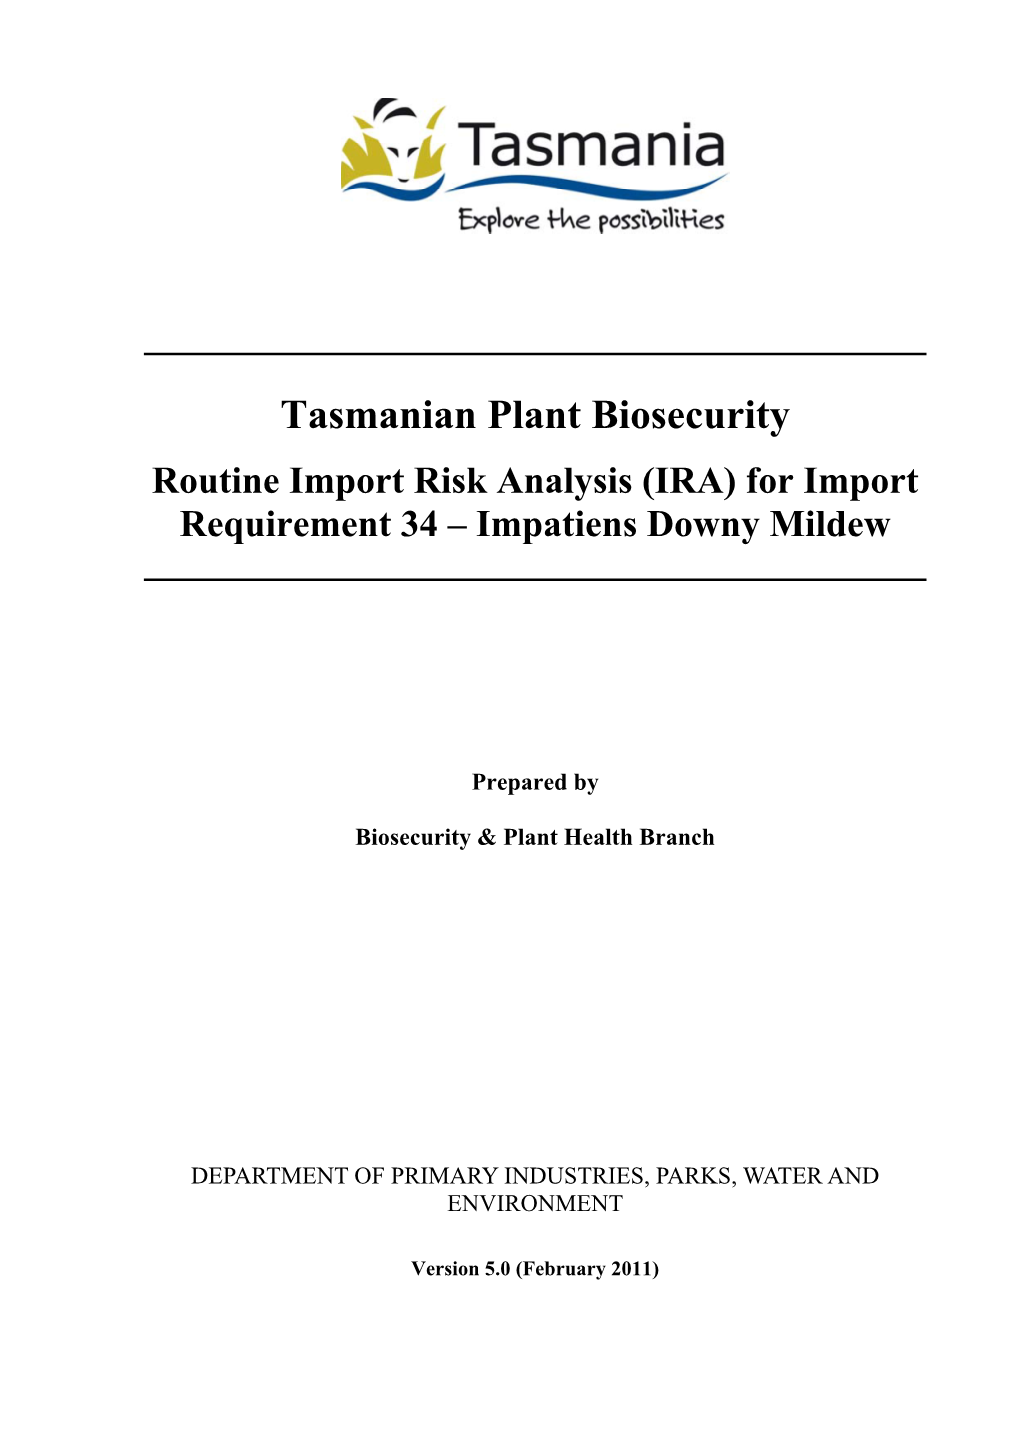 Tasmanian Plant Biosecurity Routine Import Risk Analysis (IRA) for Import Requirement 34 – Impatiens Downy Mildew